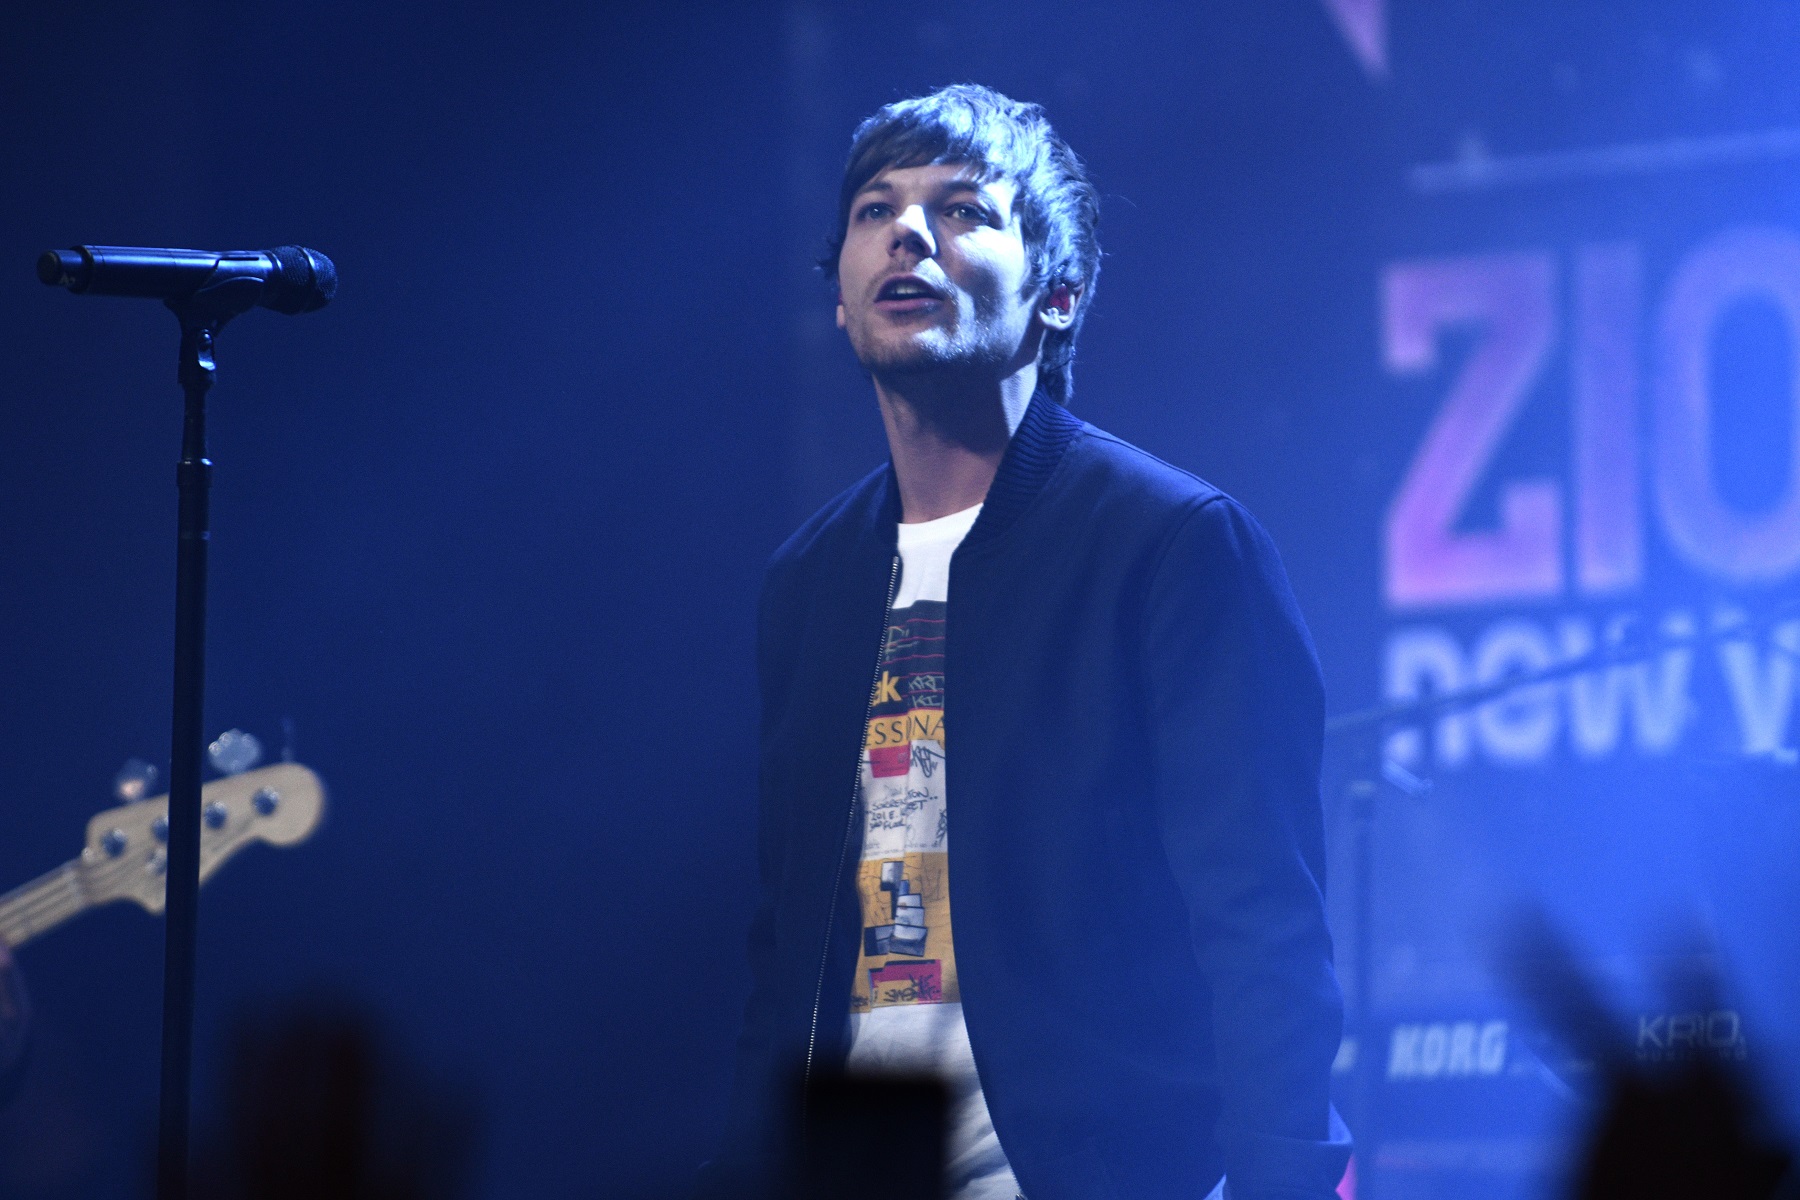 NEW YORK, NEW YORK - DECEMBER 13: Louis Tomlinson performs onstage during the z100 All Access Lounge presented by Poland Spring Pre-Show at Pier 36 on December 13, 2019 in New York City. (Photo by Gary Gershoff/Getty Images for iHeartMedia)